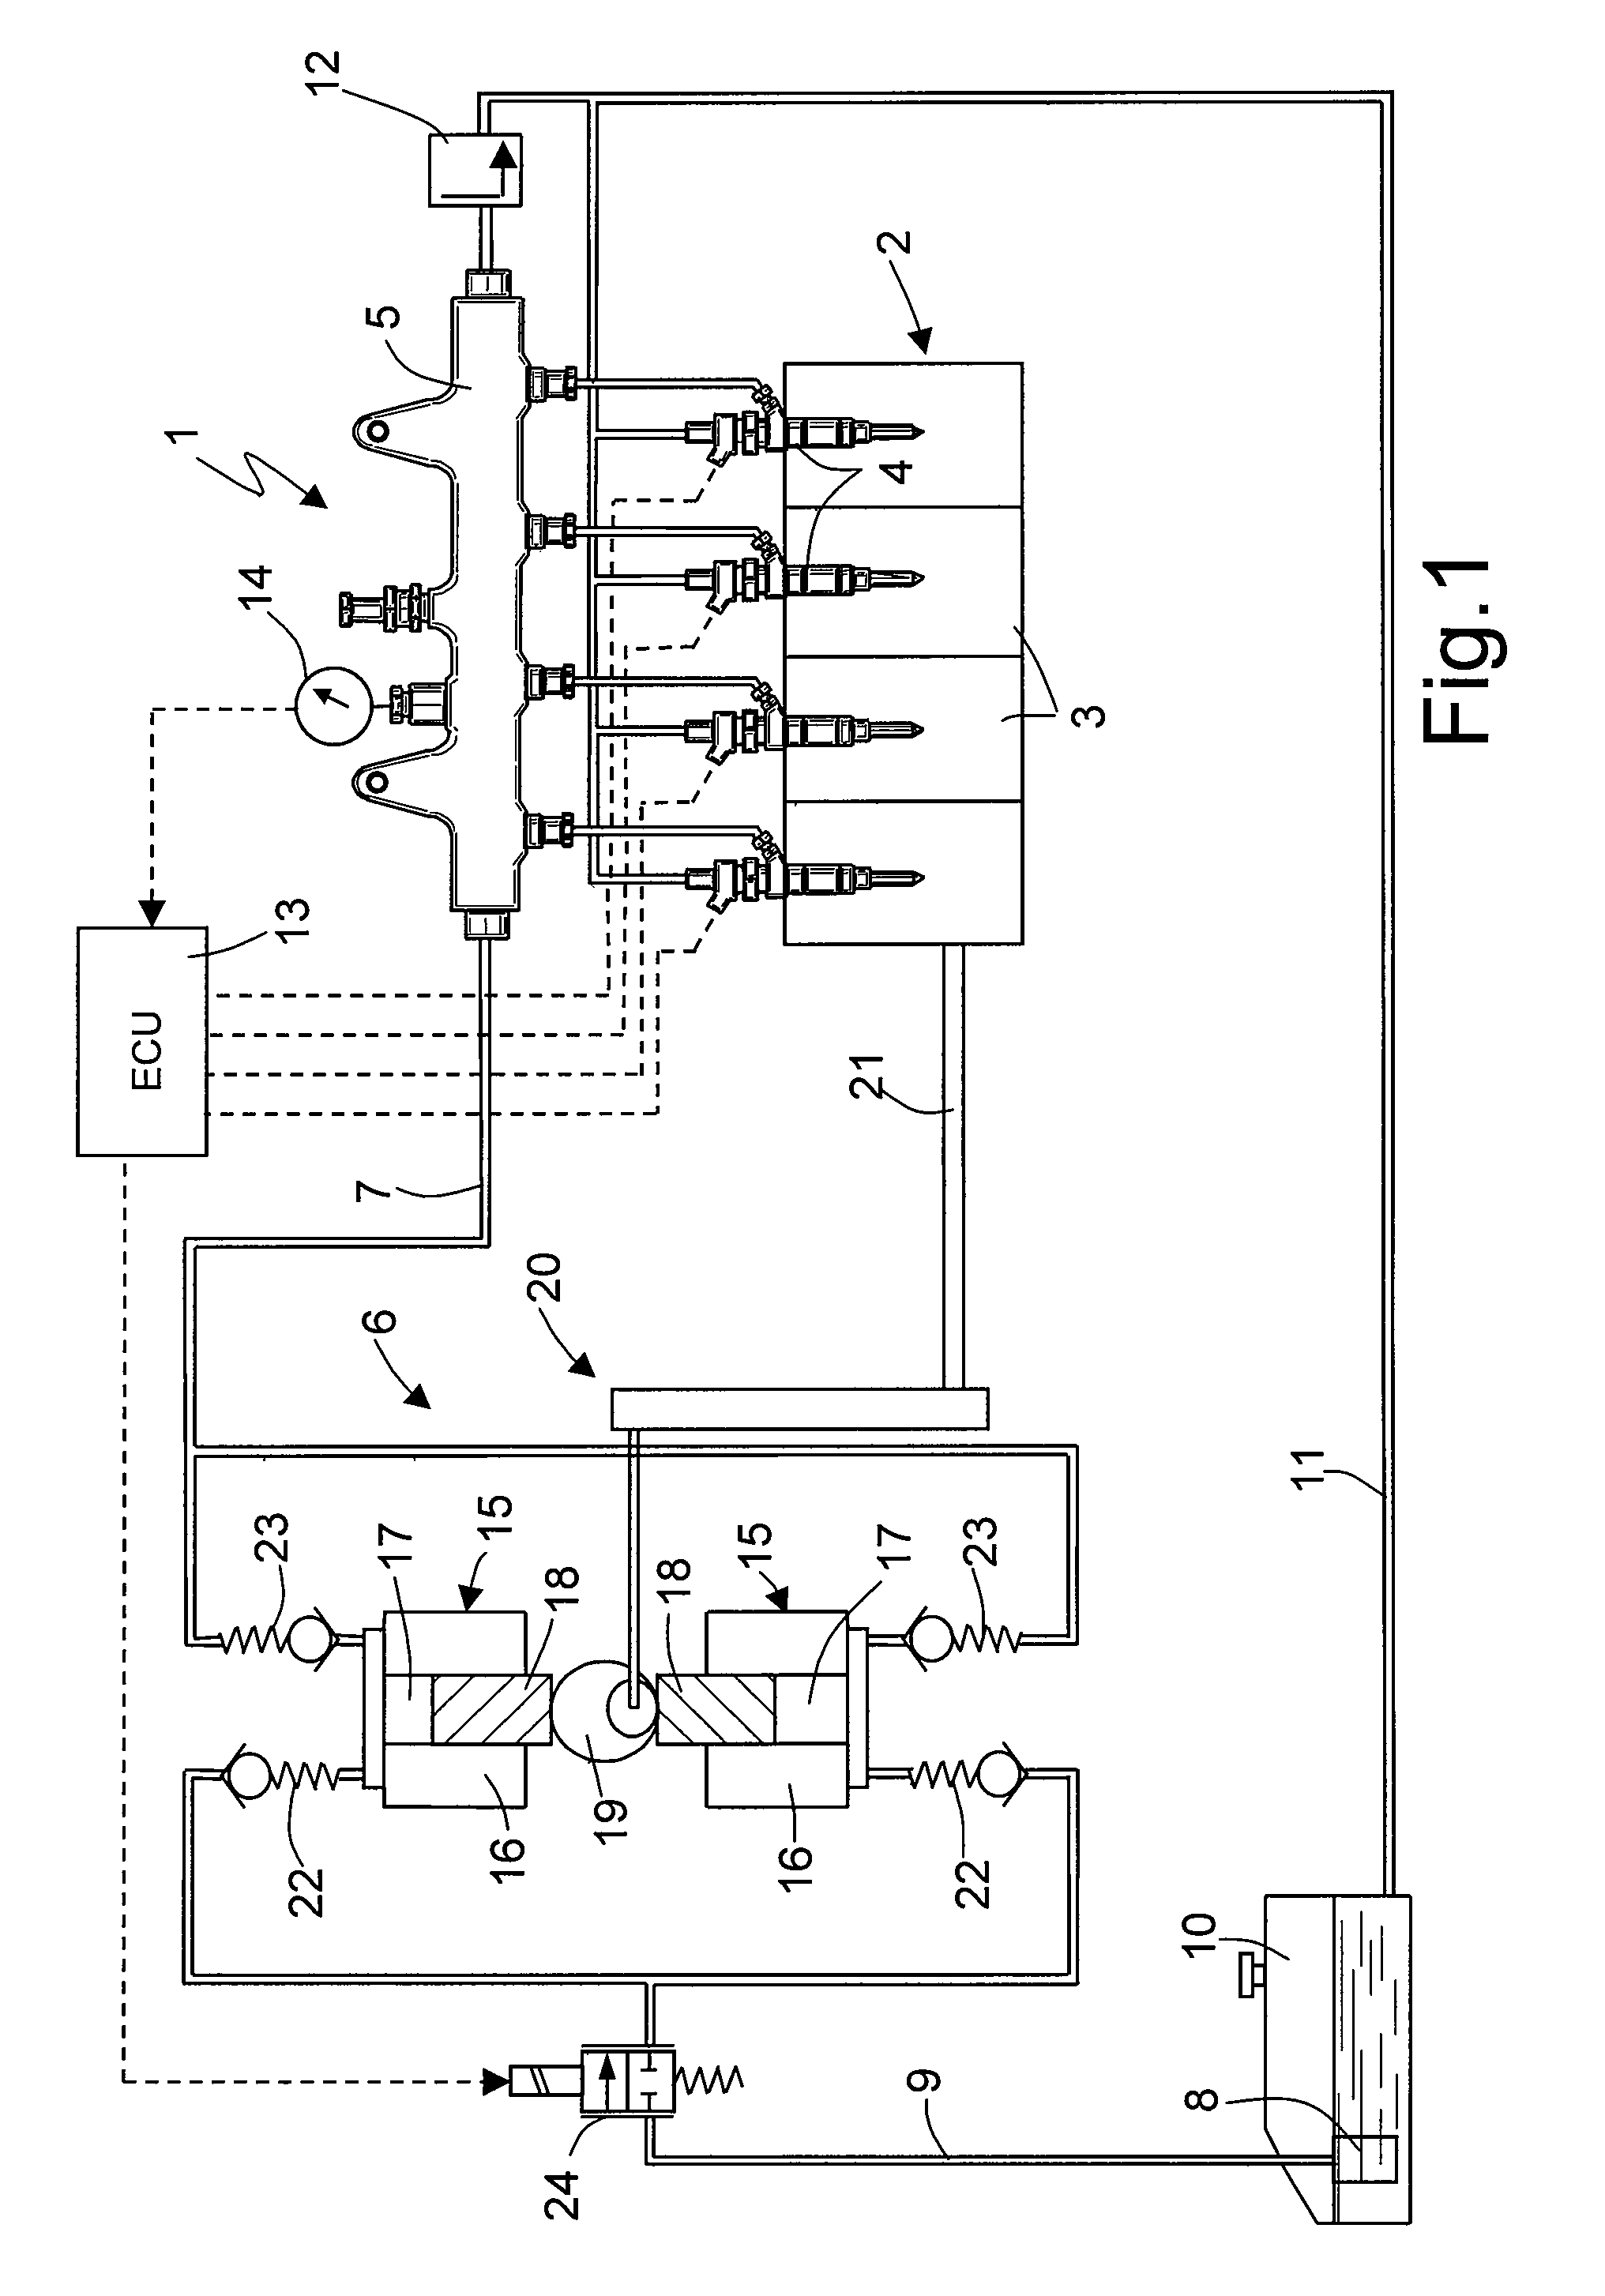 Control method of a direct injection system of the common rail type provided with a high-pressure fuel pump